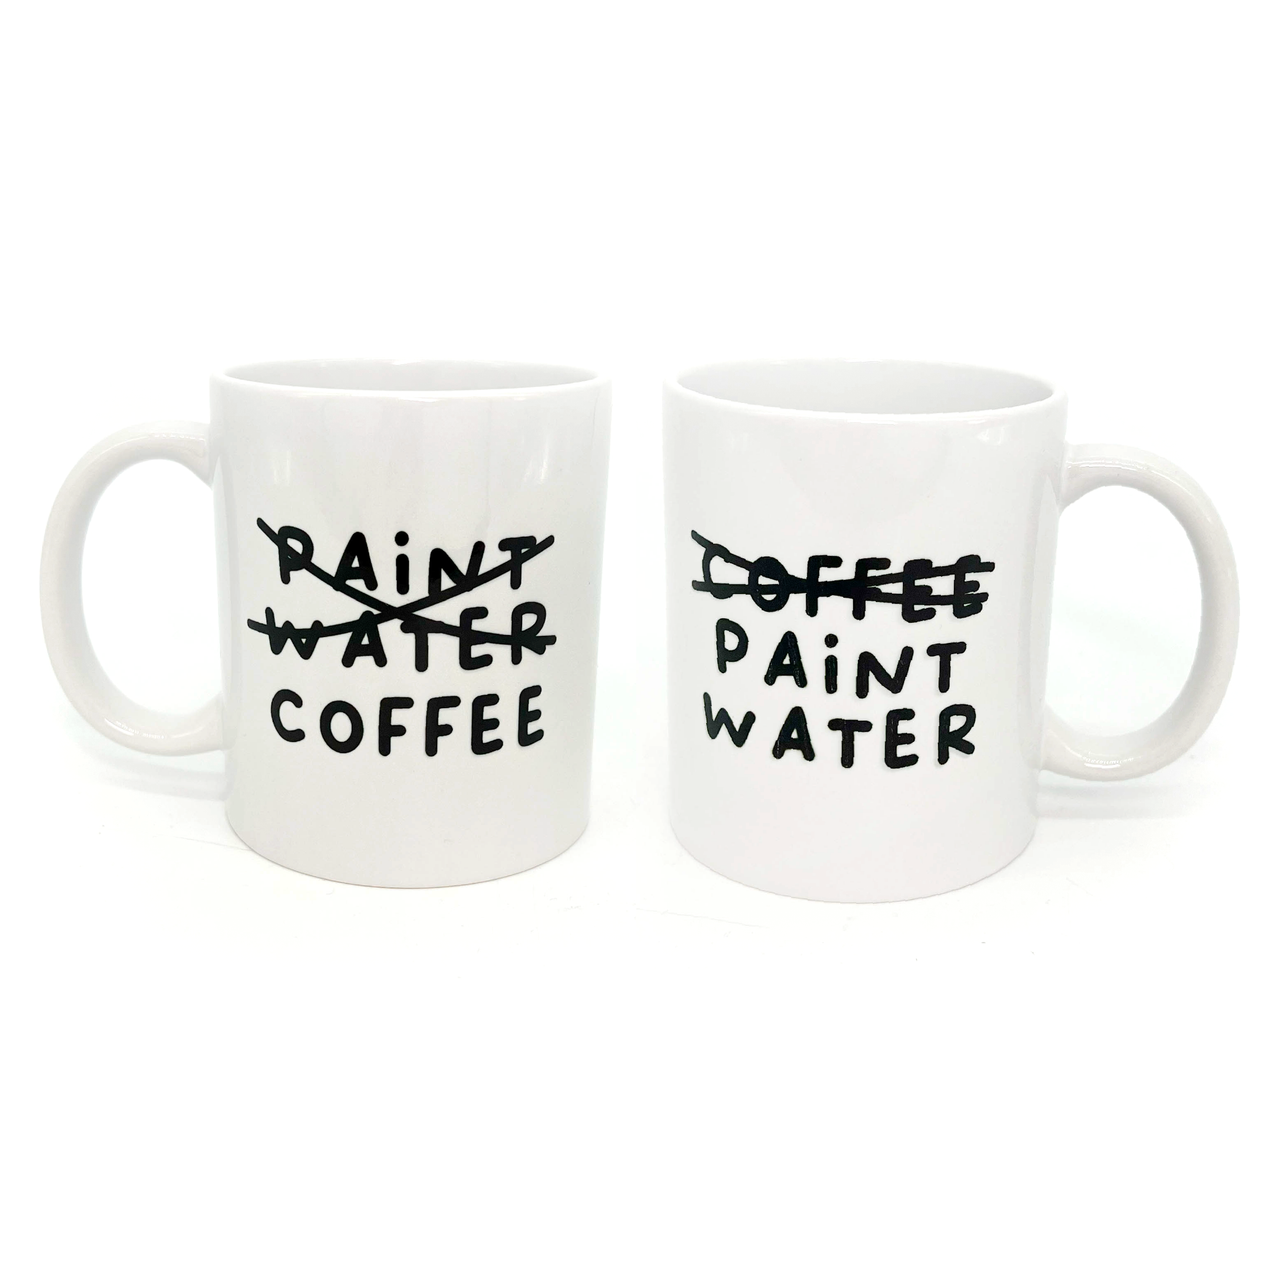 Paint water or Coffee Mug - By Lumin's Workshop